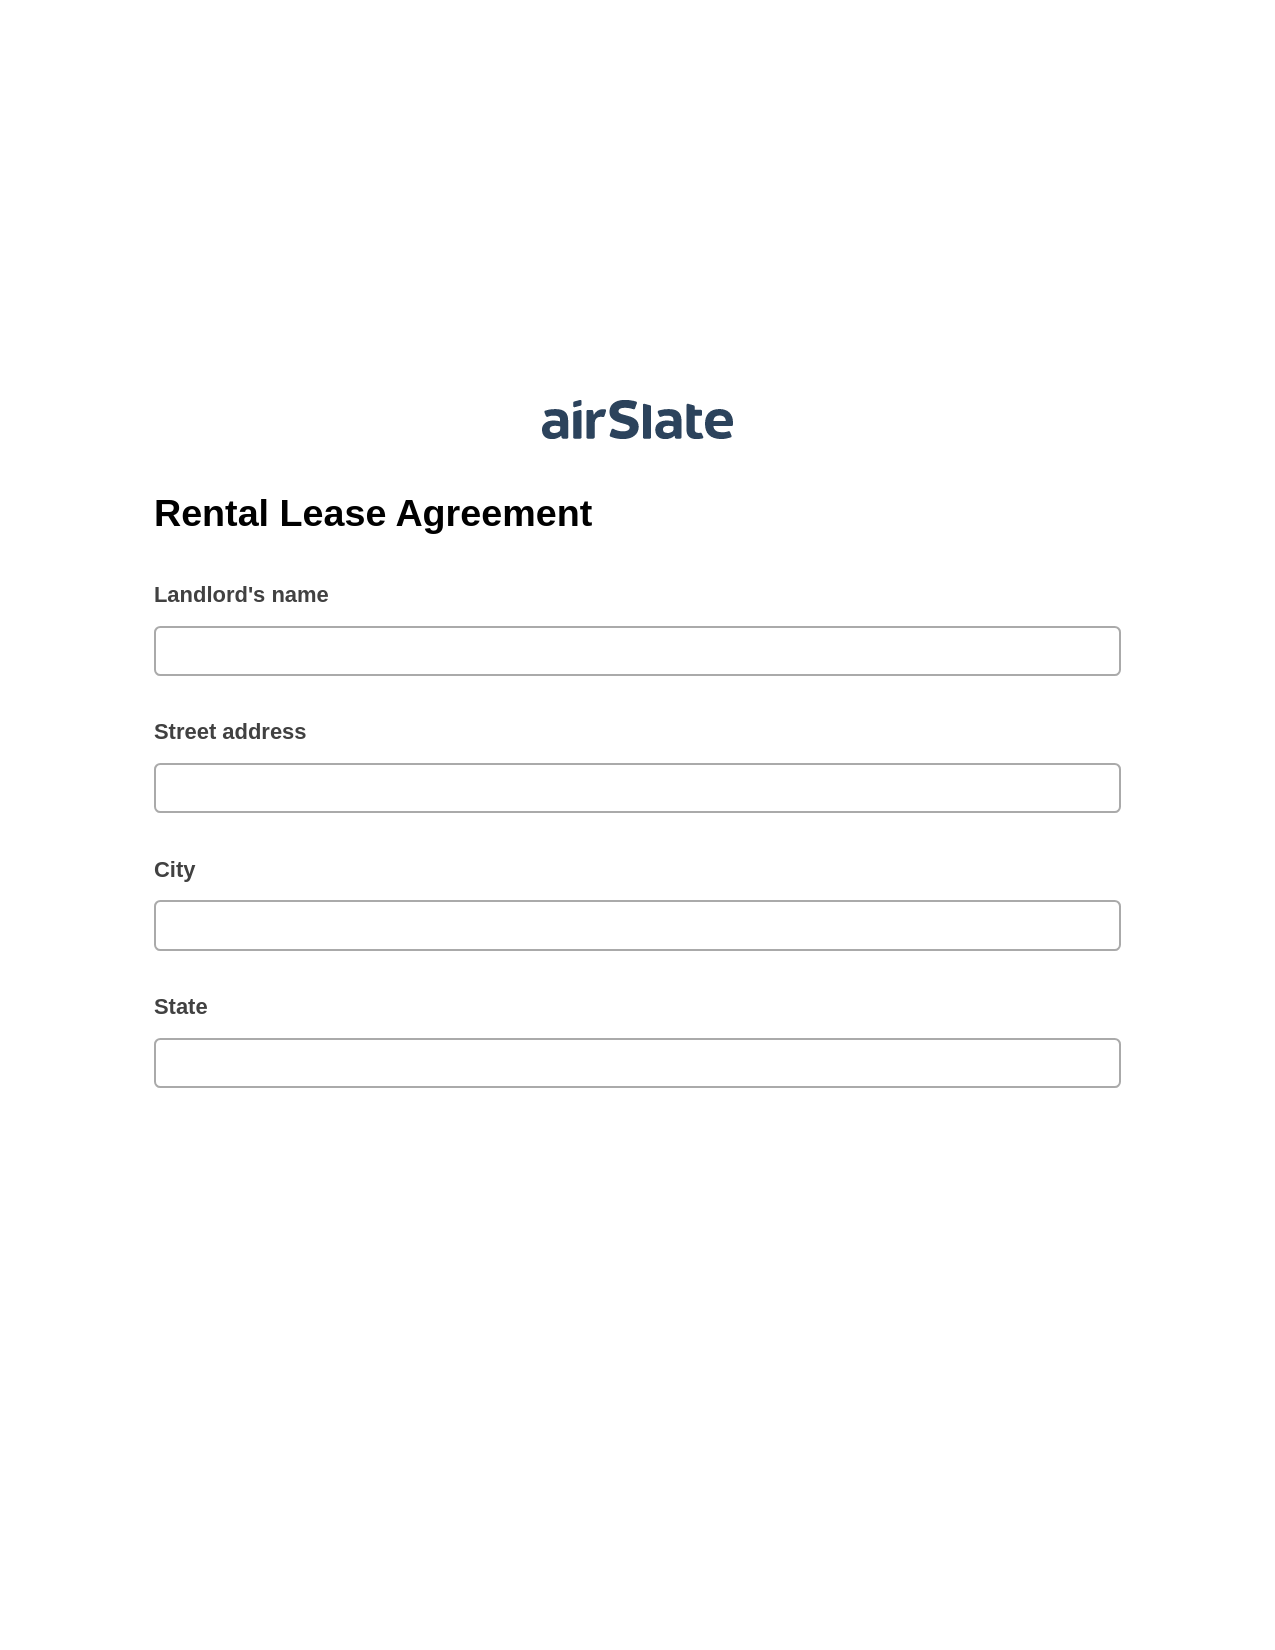 Rental Lease Agreement Pre-fill from CSV File Dropdown Options Bot, Update NetSuite Records Bot, Archive to SharePoint Folder Bot